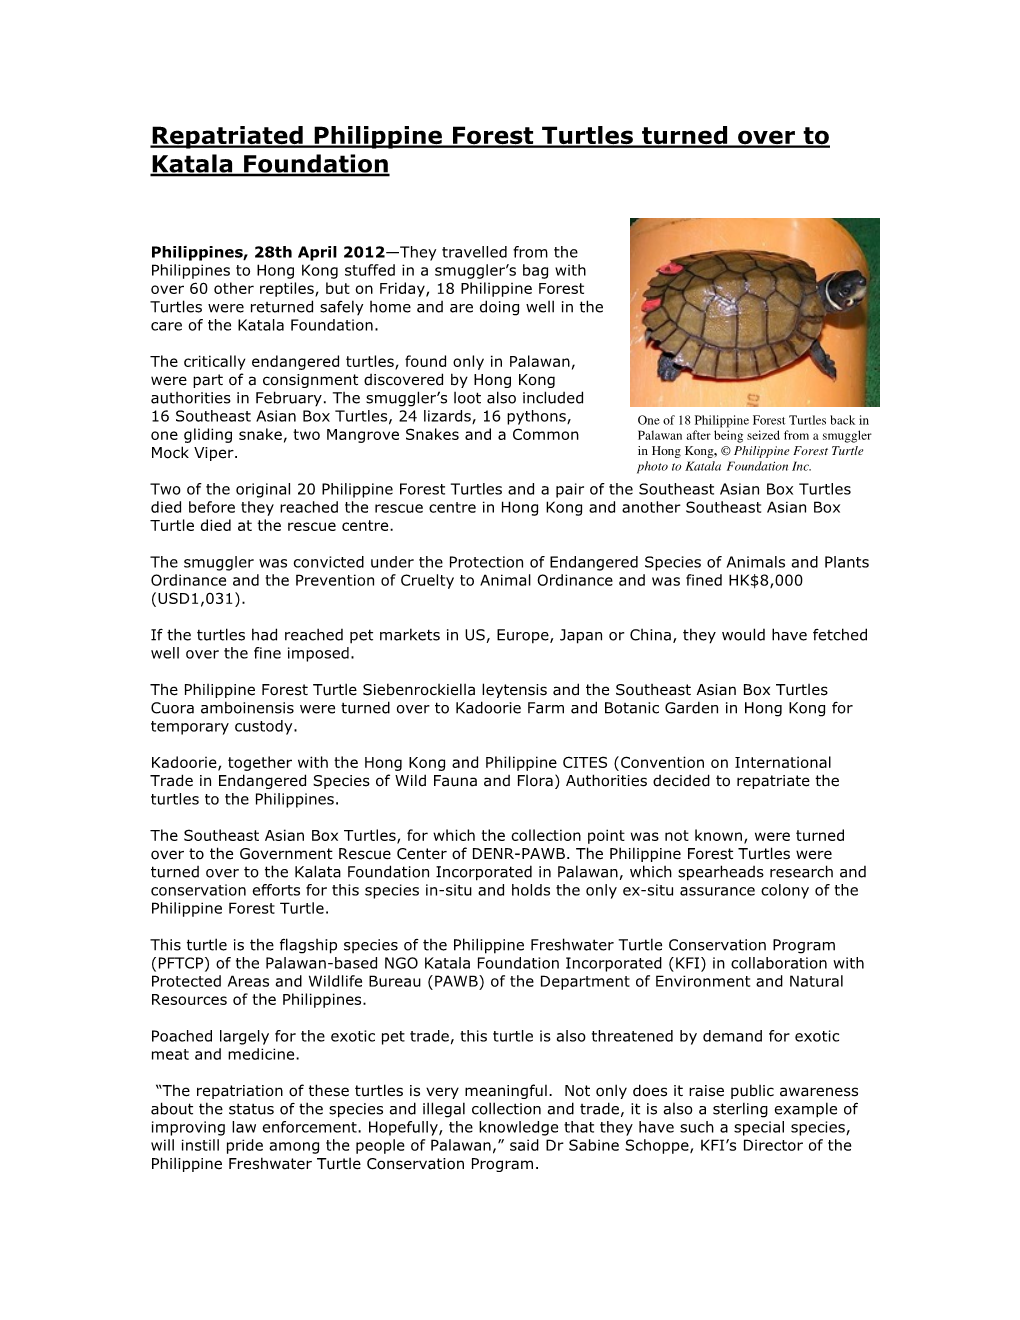 Repatriated Philippine Forest Turtles Turned Over to Katala Foundation